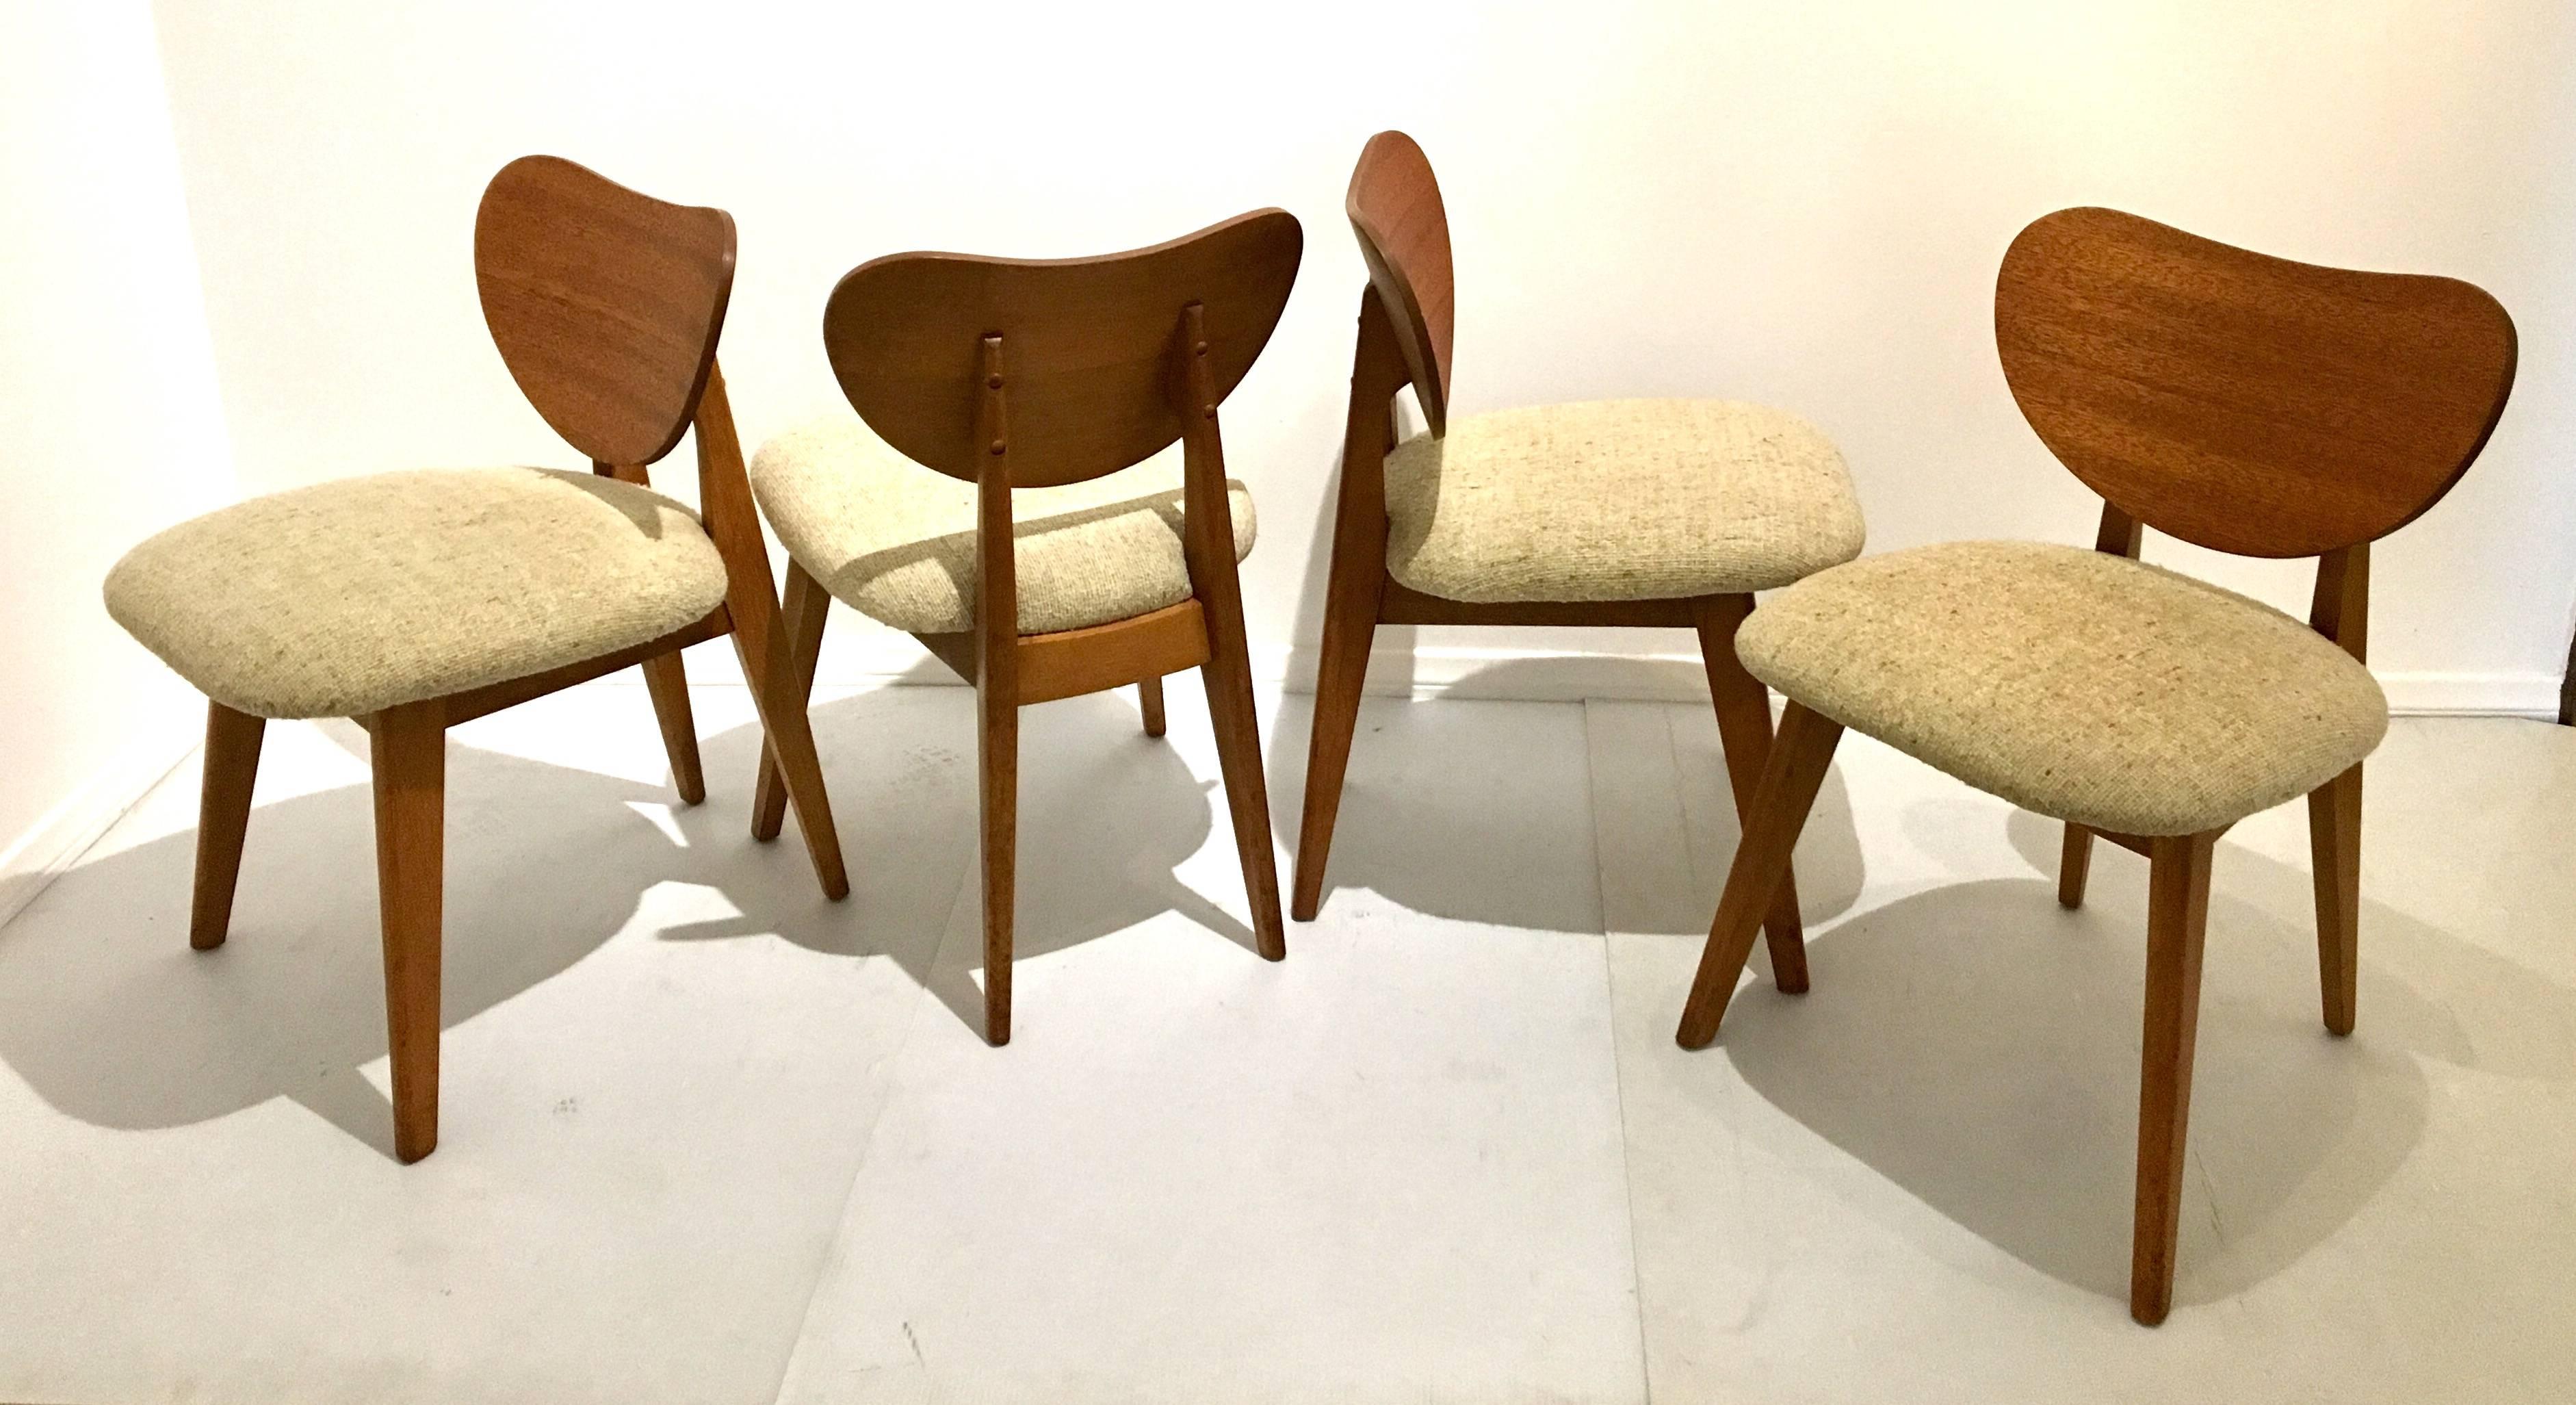 Beautiful set of rare dining chairs, by Brown Saltman, circa 1950s in mahogany each chair its solid and sturdy and recover in beautiful wool cream color material.